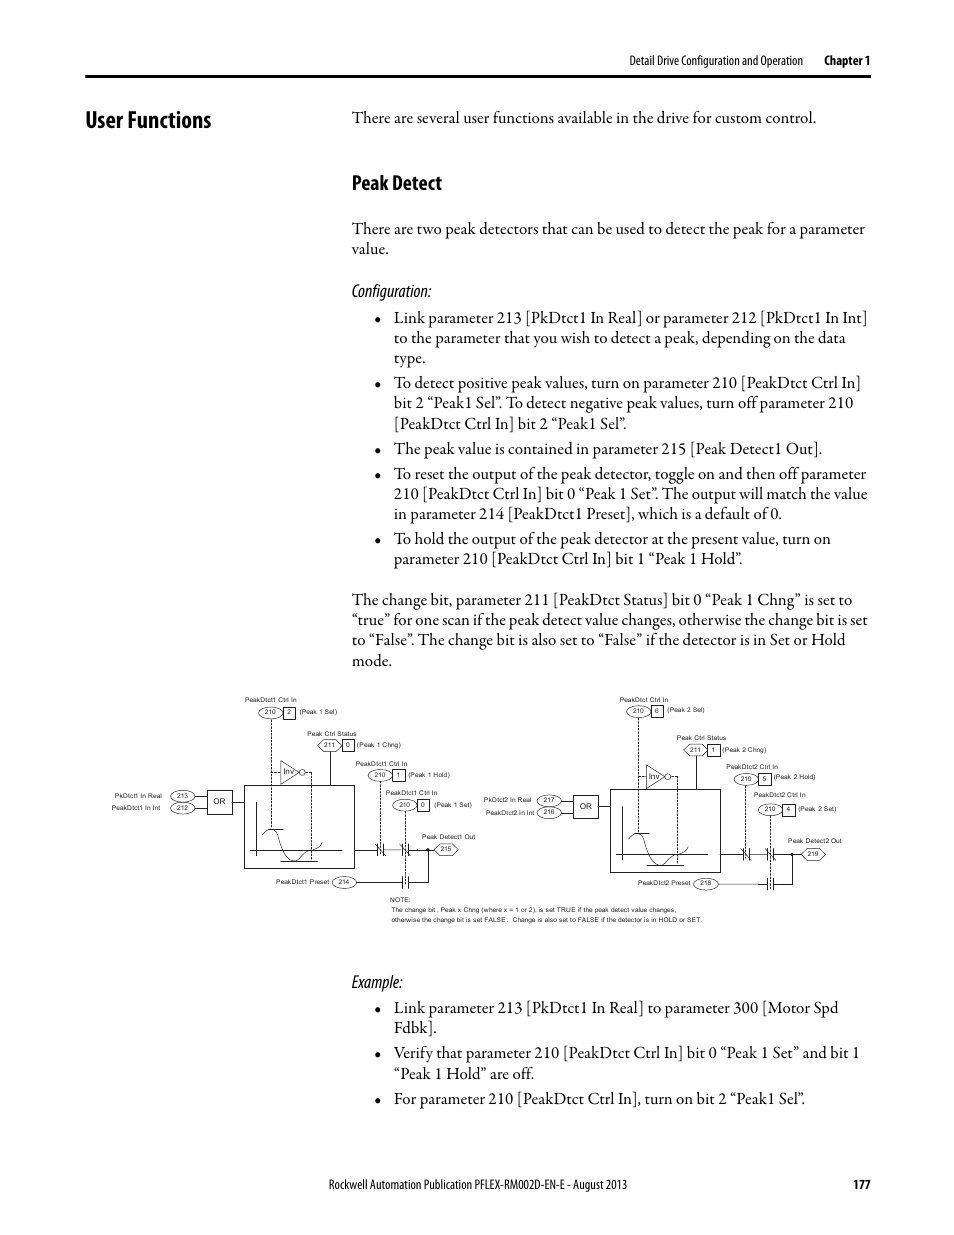 User functions, Peak detect, Configuration | Example | Rockwell Automation 20D PowerFlex 700S with Phase I Control Reference Manual User Manual | Page 177 / 190